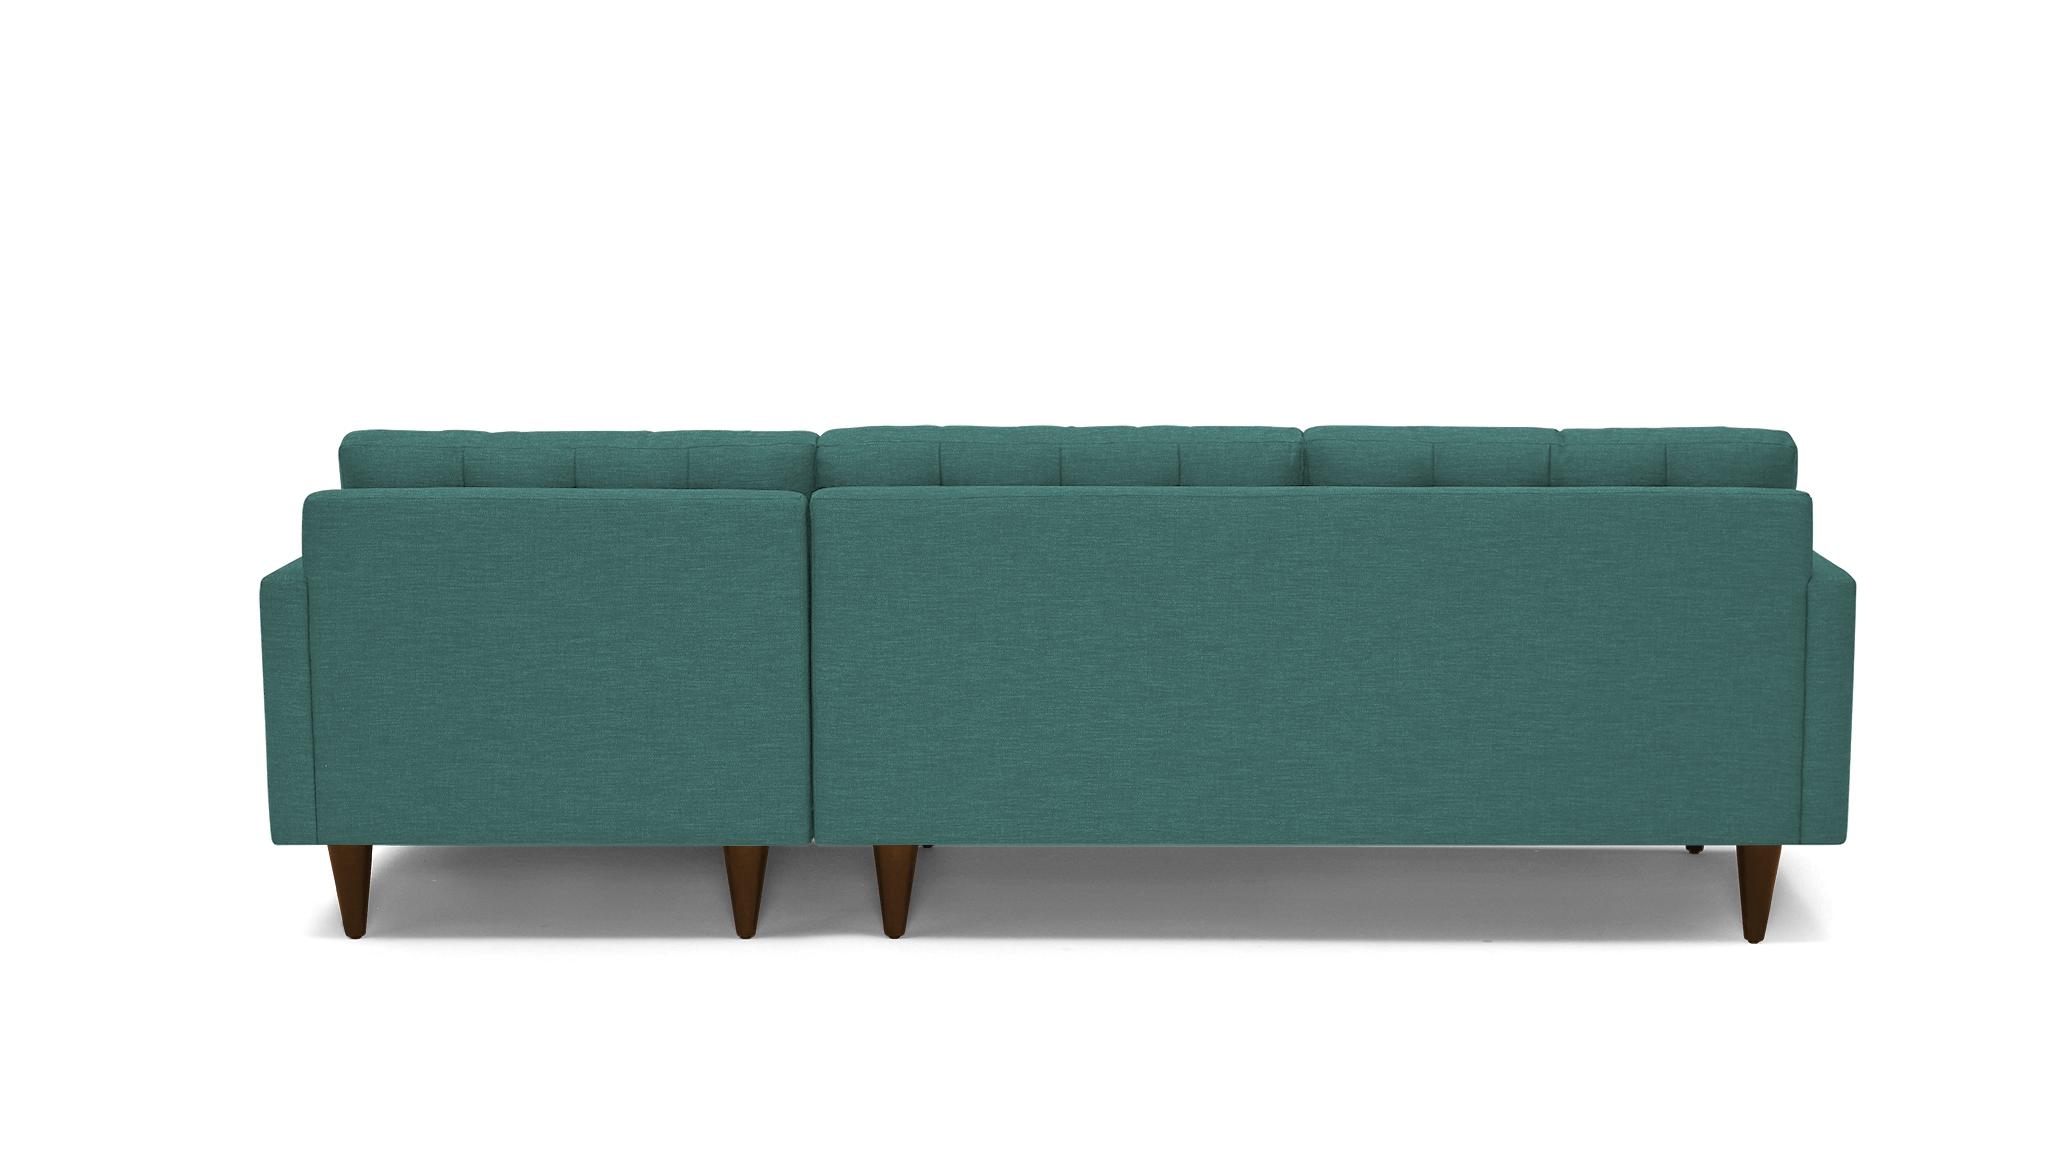 Blue Eliot Mid Century Modern Sectional - Prime Peacock - Mocha - Right - Image 4